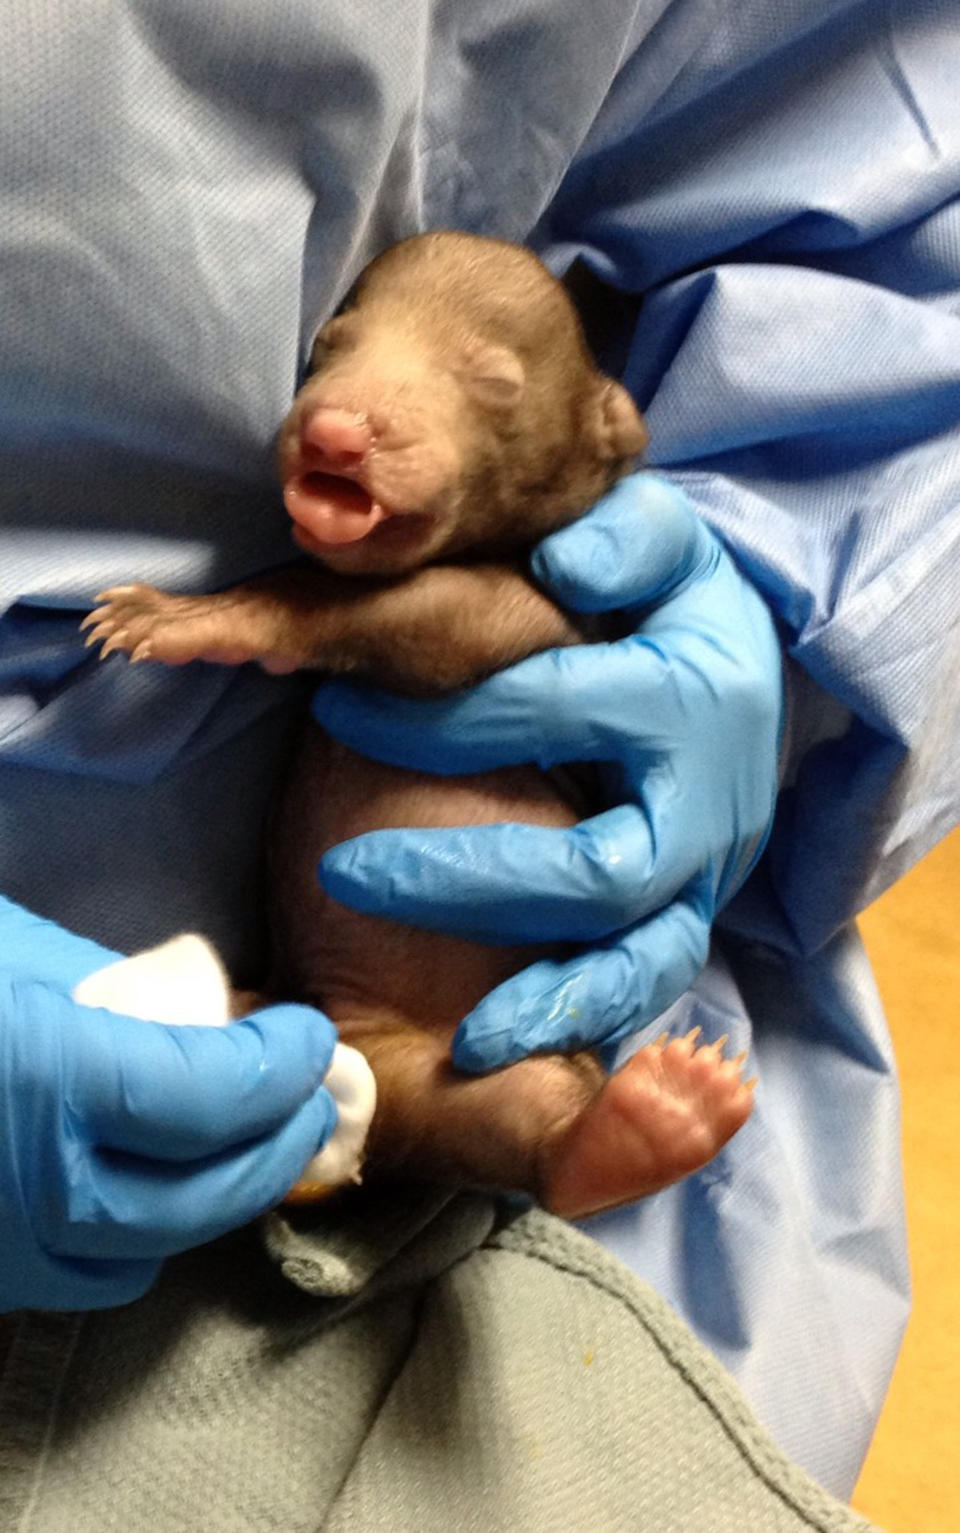 This handout photo provided by the Smithsonian's National Zoo, taken Jan. 8, 2014, shows a sloth bear Khali's newborn cub being cared for at the veterinary hospital at the zoo in Washington. Animal keepers at the National Zoo have saved a sloth bear cub after two others were eaten by the mother. The three cubs were born in December to a mother named Khali. One was eaten within 20 minutes, and a second cub was eaten after seven days. The zoo says it's not uncommon for carnivores to eat their young if they're compromised somehow. (AP Photo/Smithsonian's National Zoo)